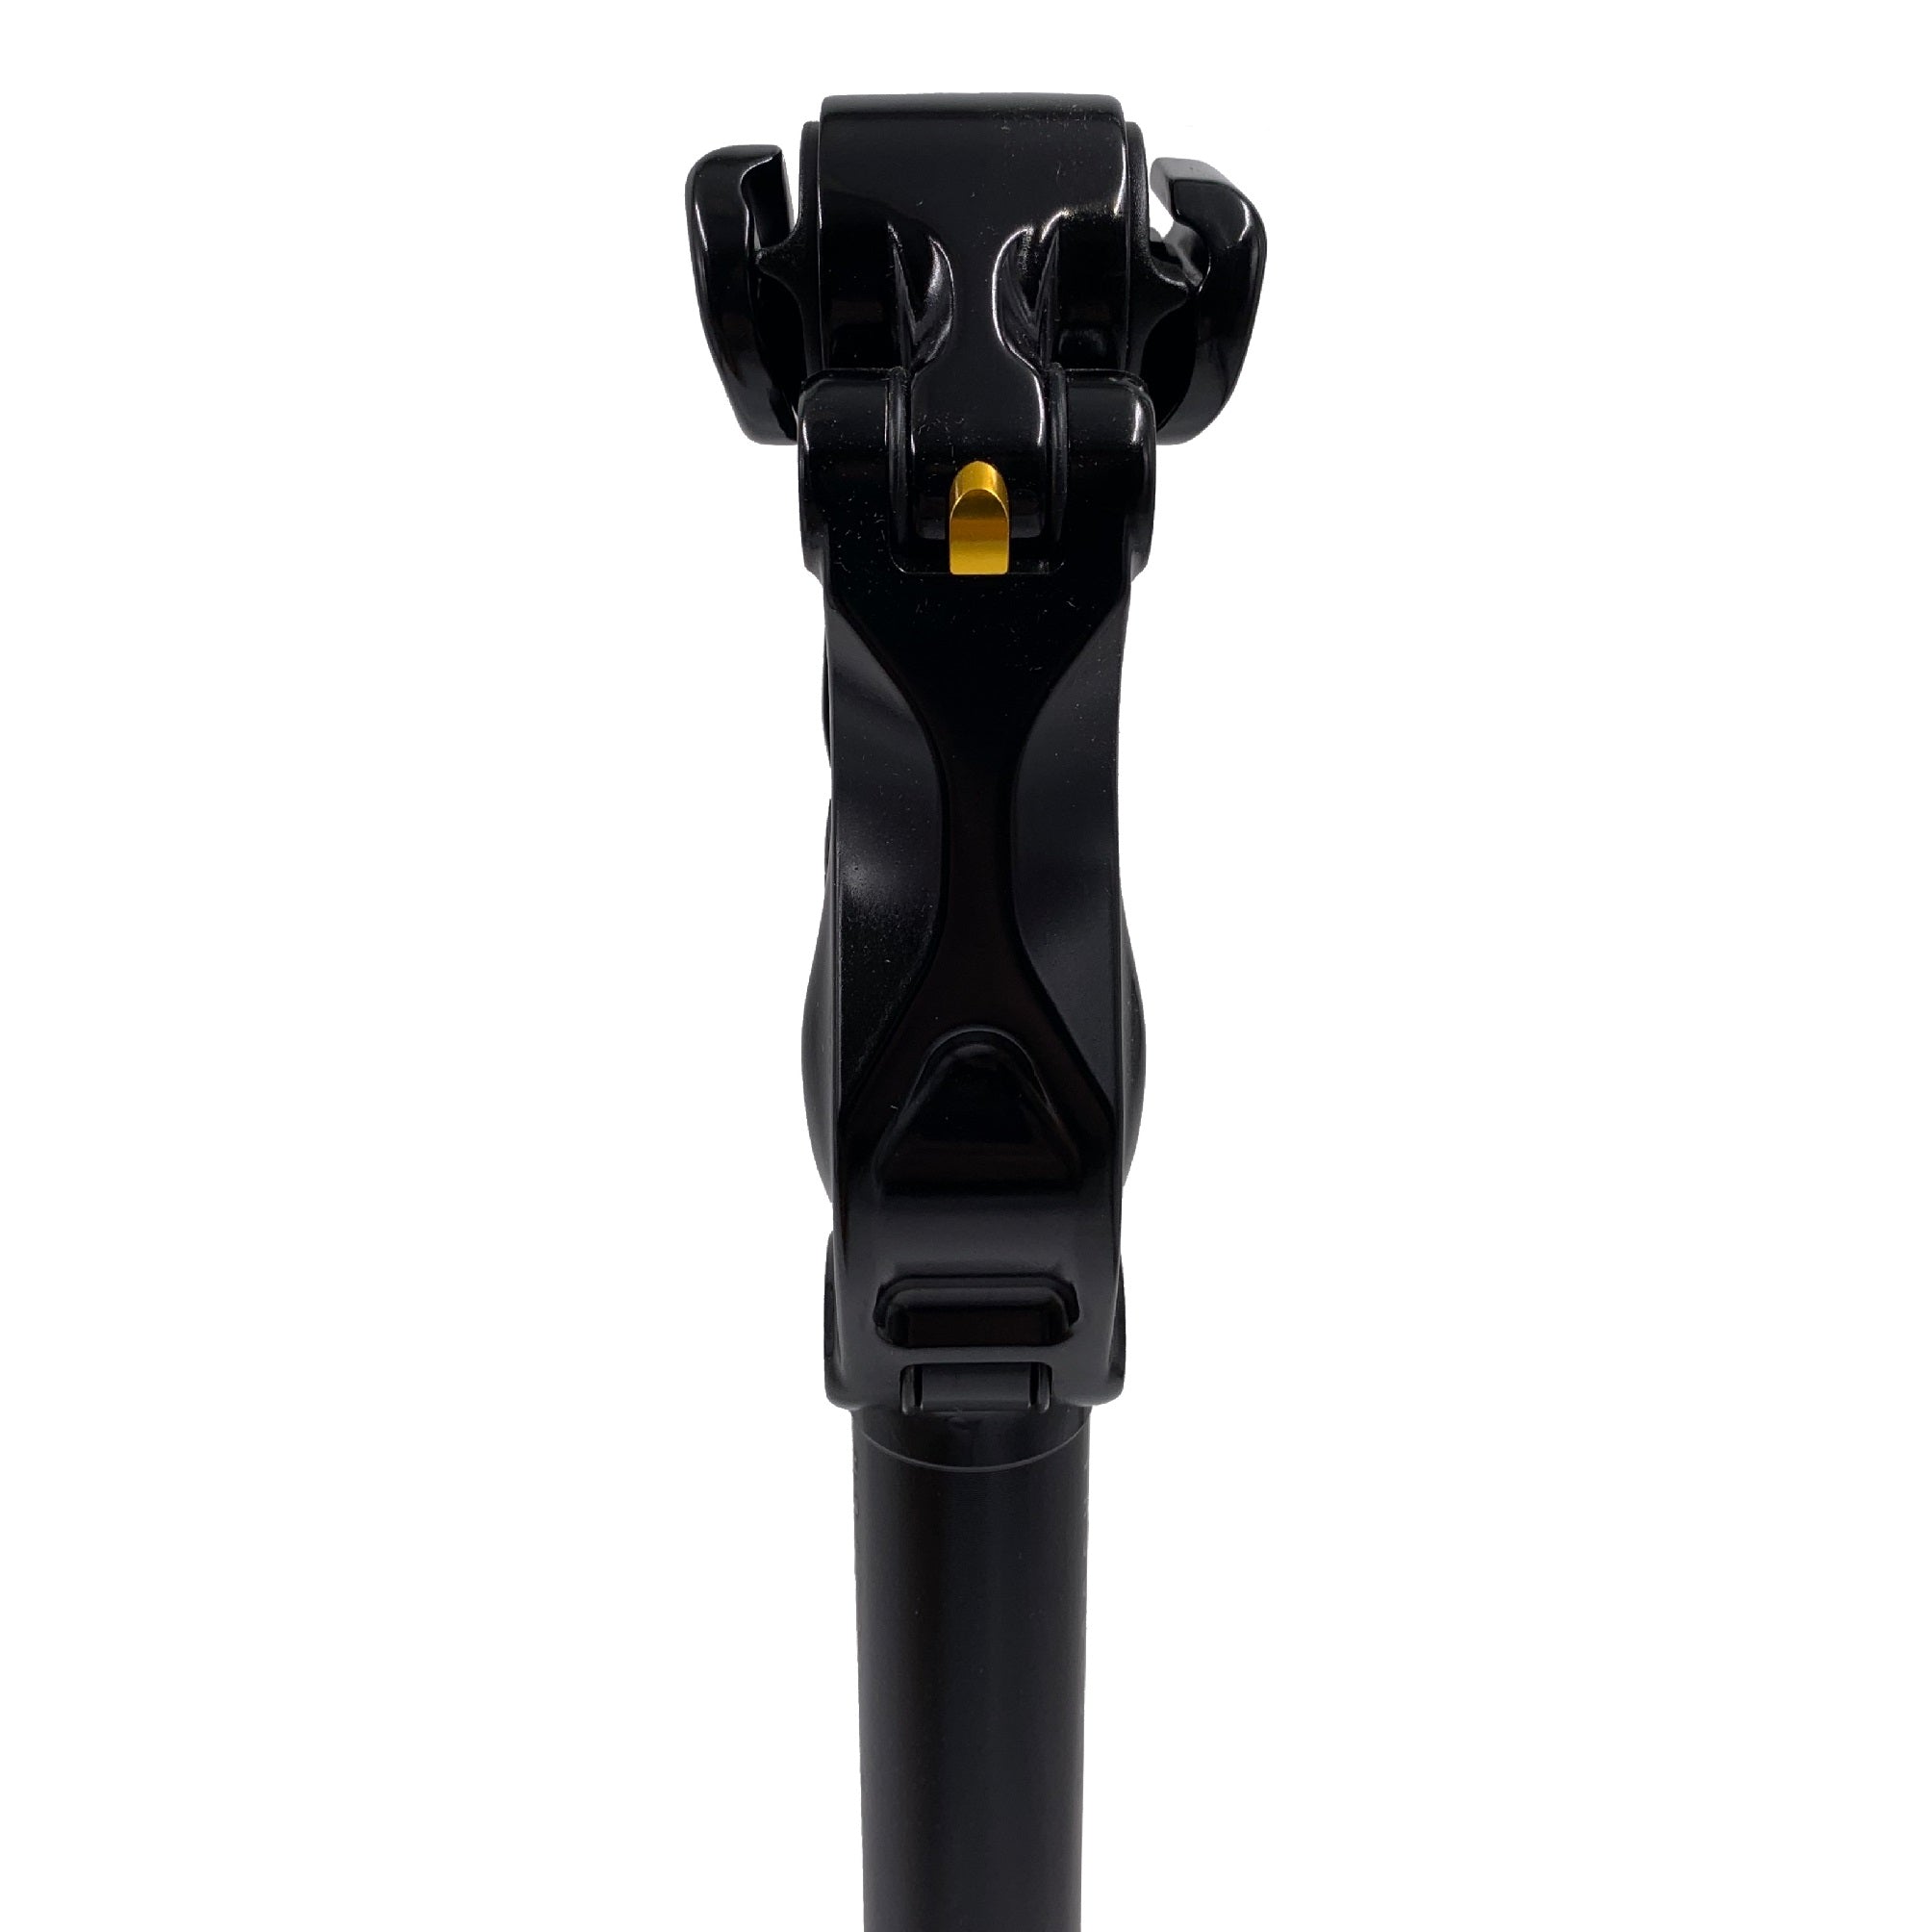 Cane Creek G4 LT Thudbuster Suspension Seatpost Long Travel - The Bikesmiths